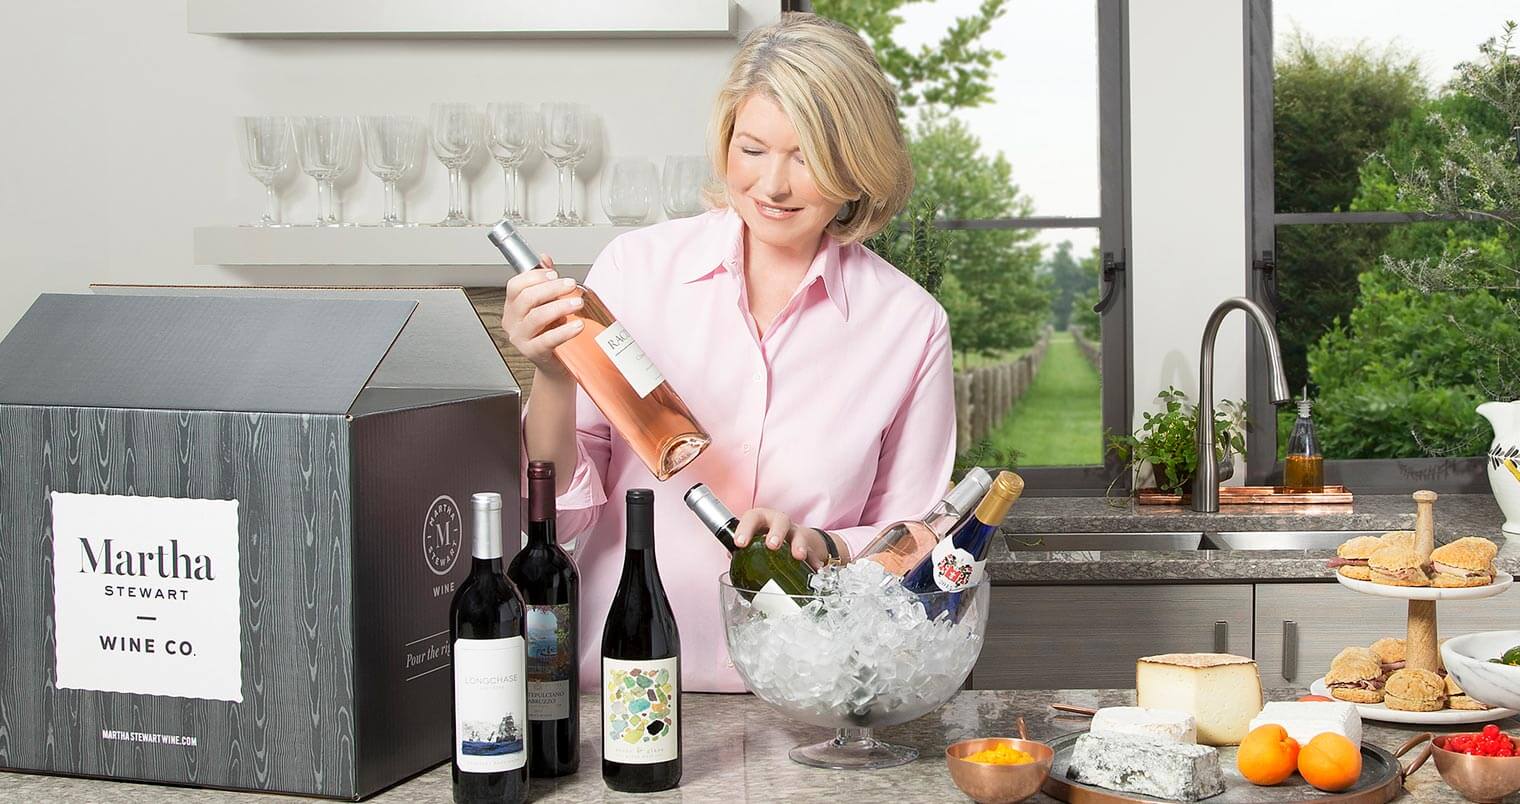 Martha Stewart Launches New Wine Company, featured image